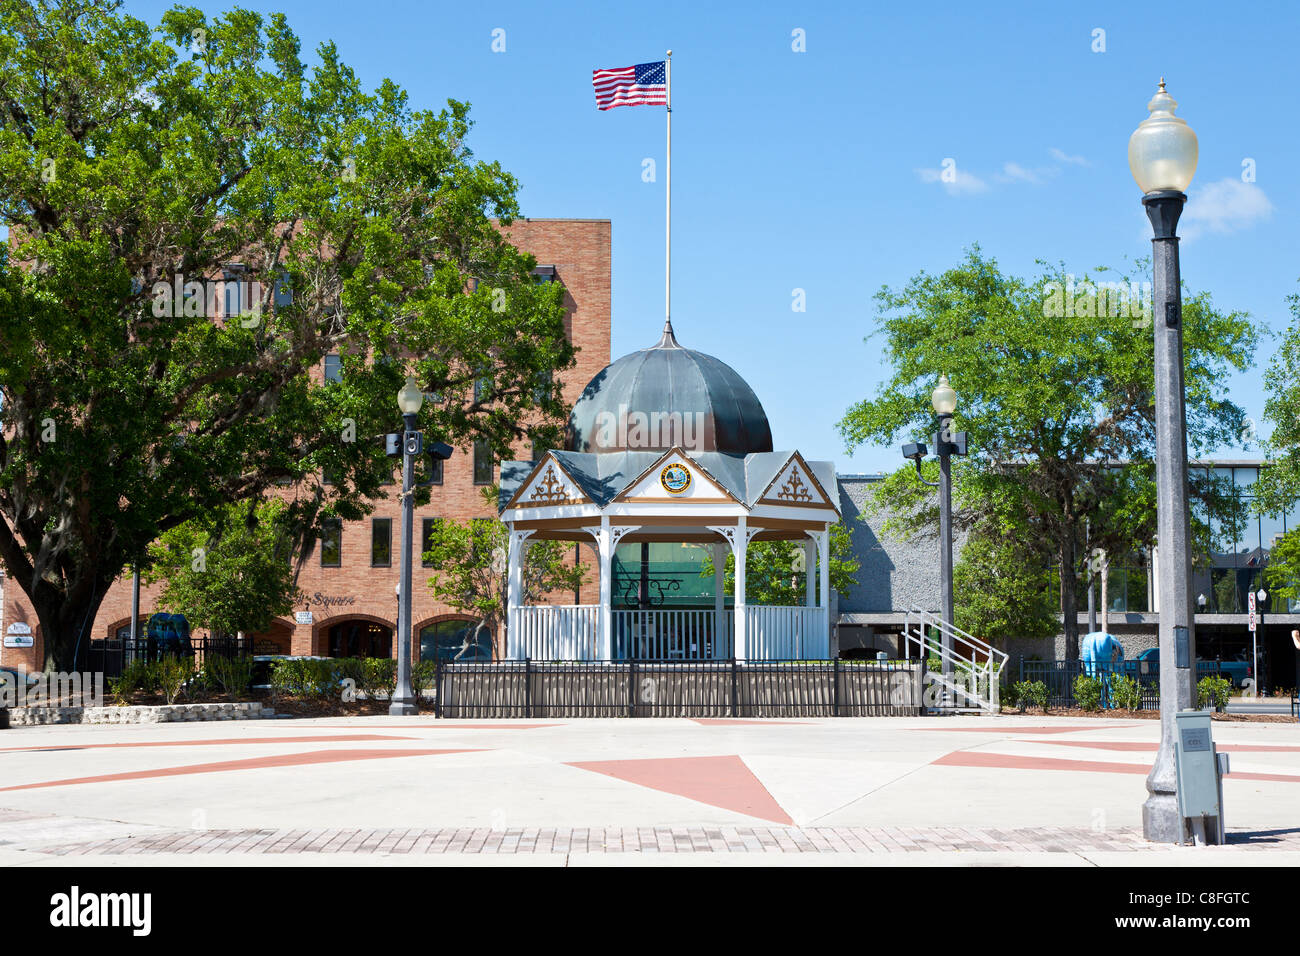 Gazebo with American flag on the downtown square in Ocala Florida Stock Photo